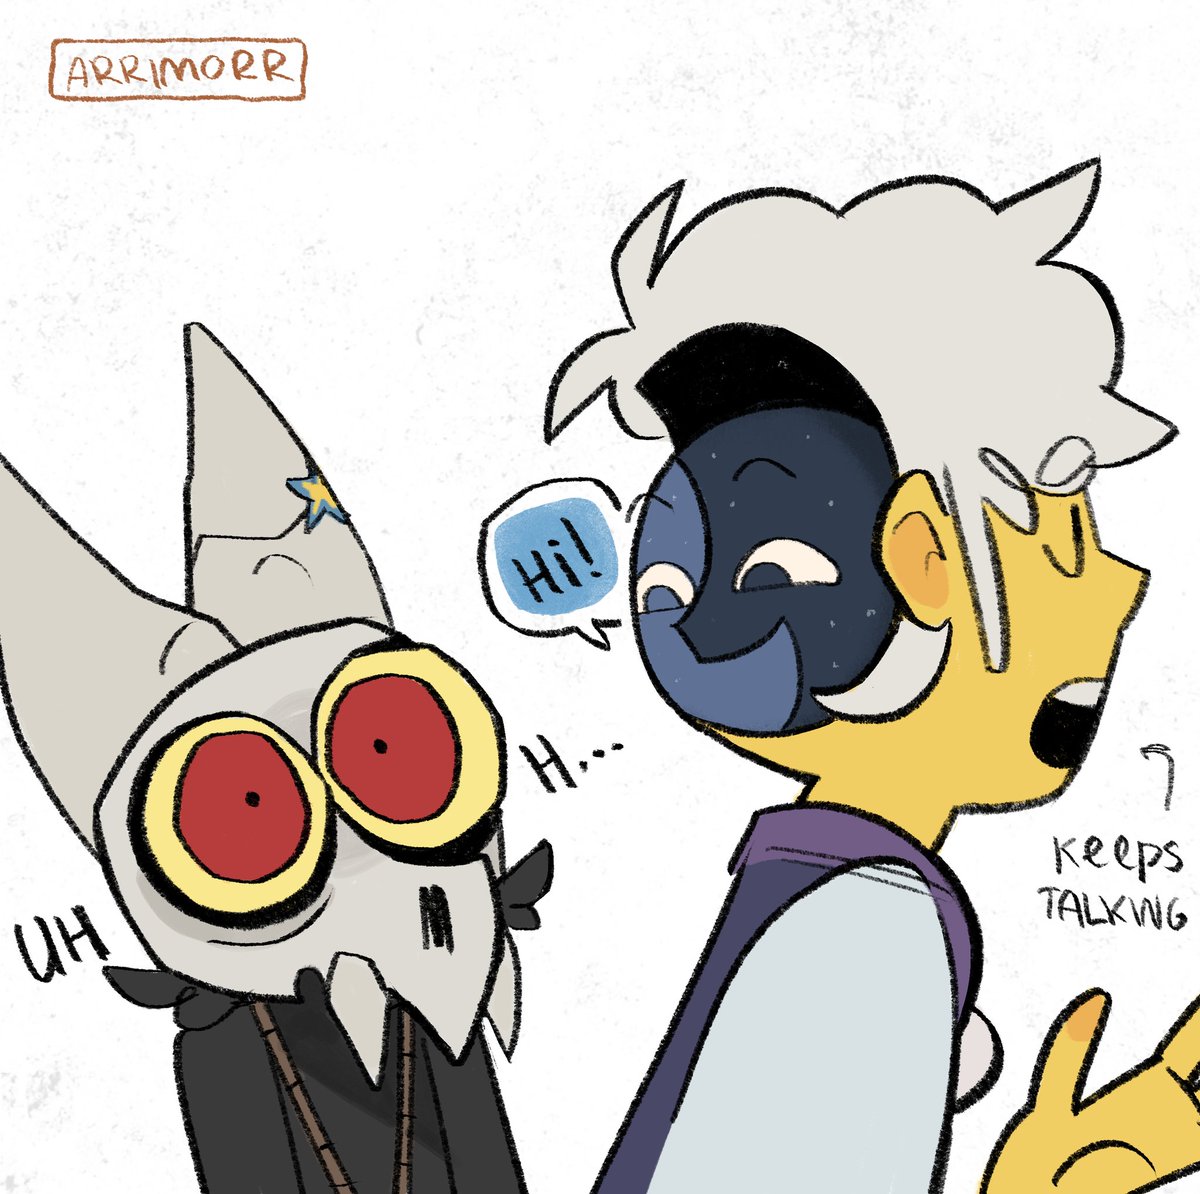 God I can't stop thinking about this #TheOwlHouse #platinumbones